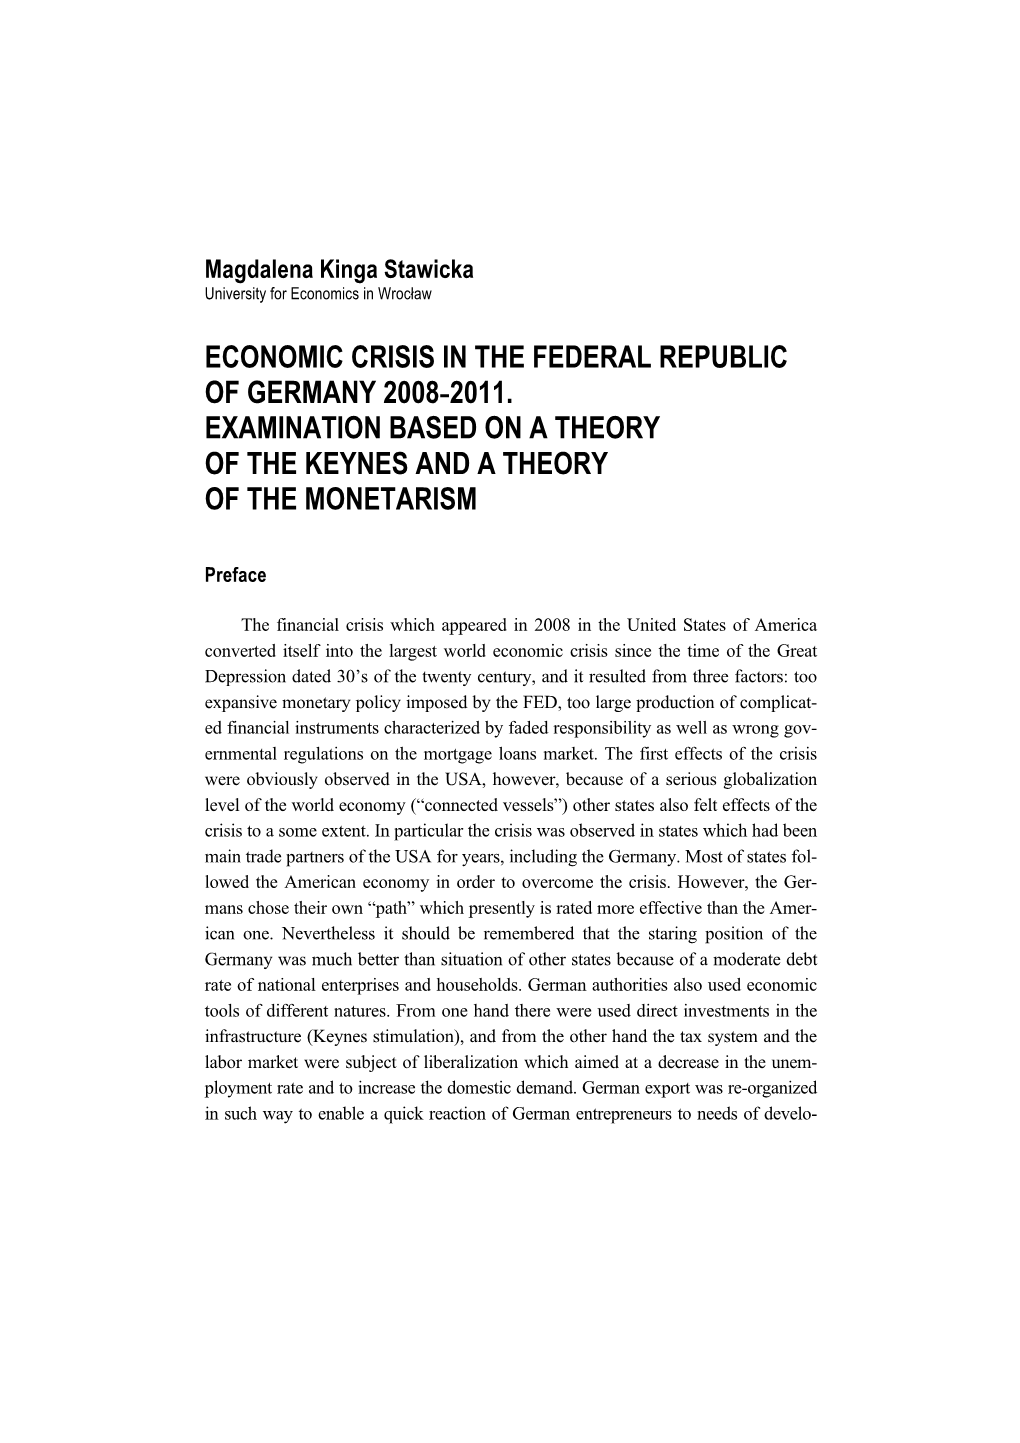 Economic Crisis in the Federal Republic of Germany 2008-2011. Examination Based on a Theory of the Keynes and a Theory of the Monetarism